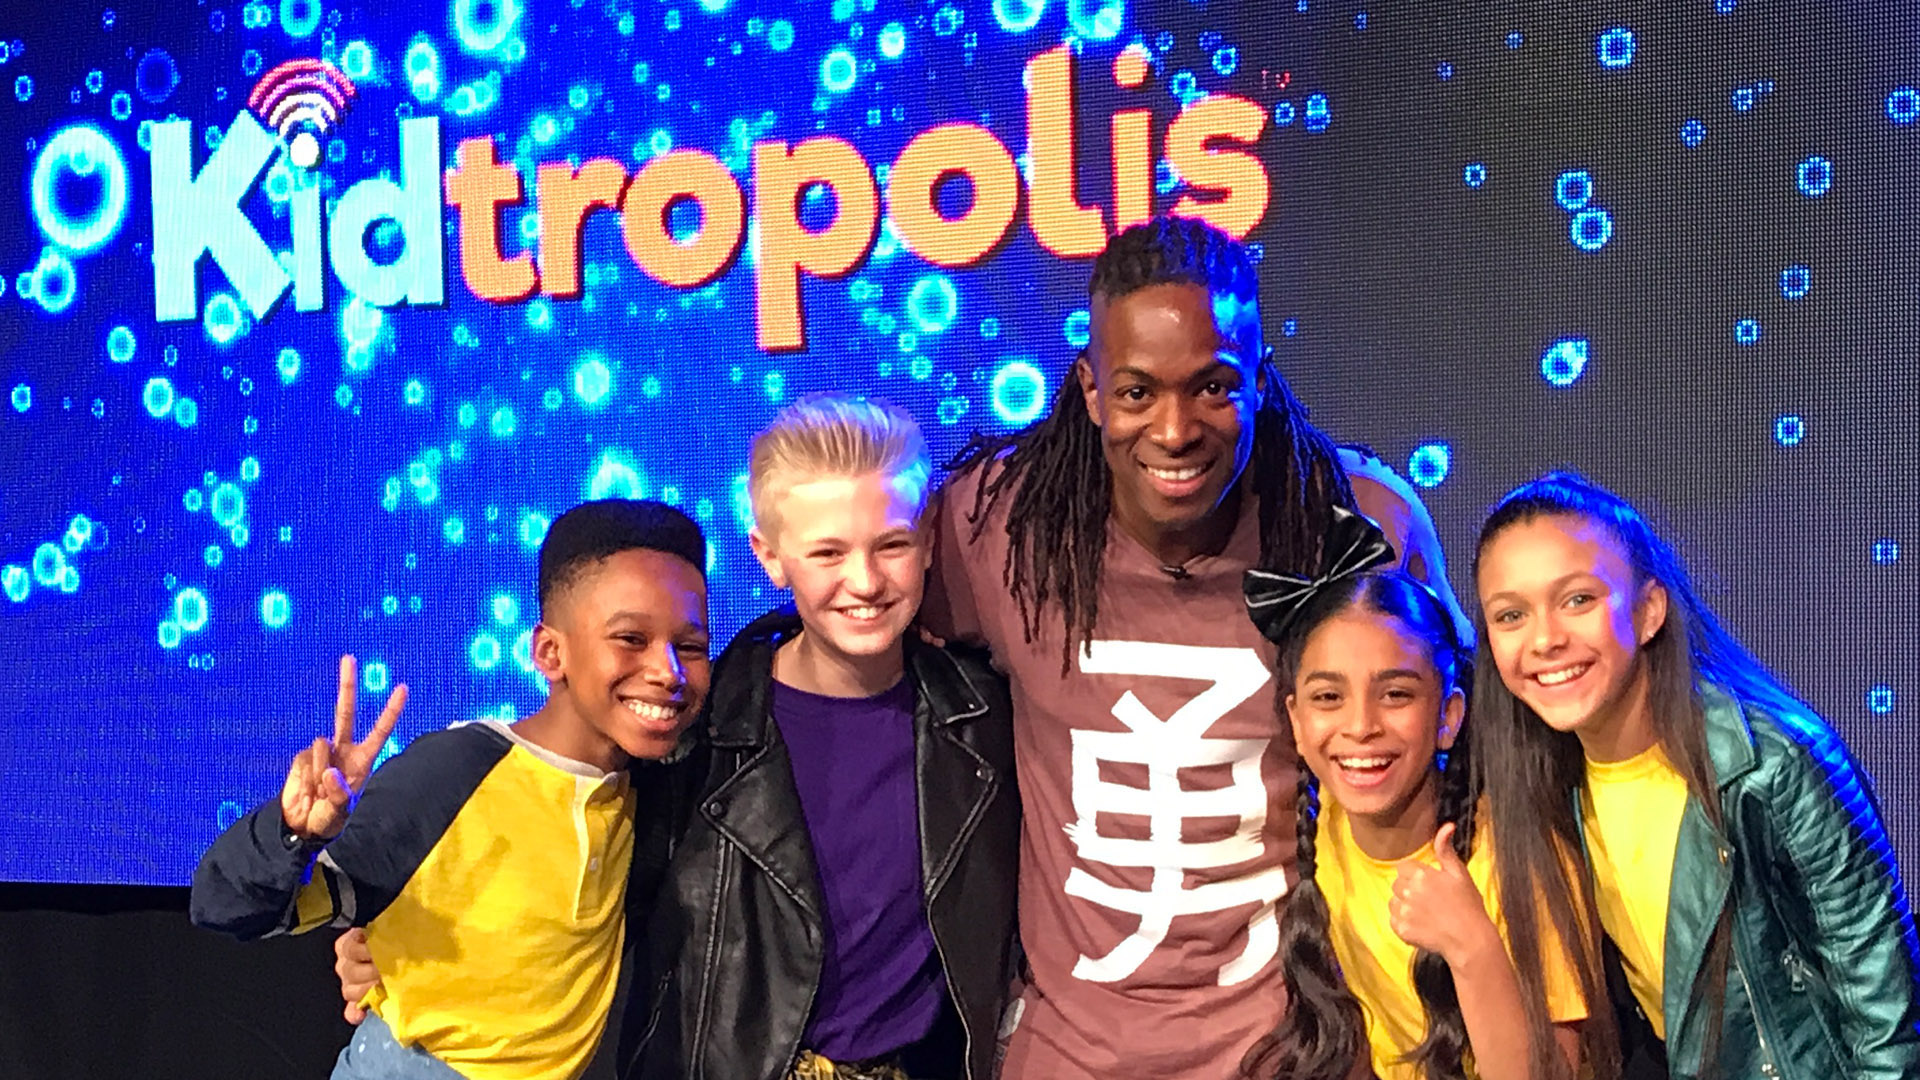 Kidz Bop 2018 Album Competition Still With Aston, Max, Nigel Clarke, Twinkle and Lois